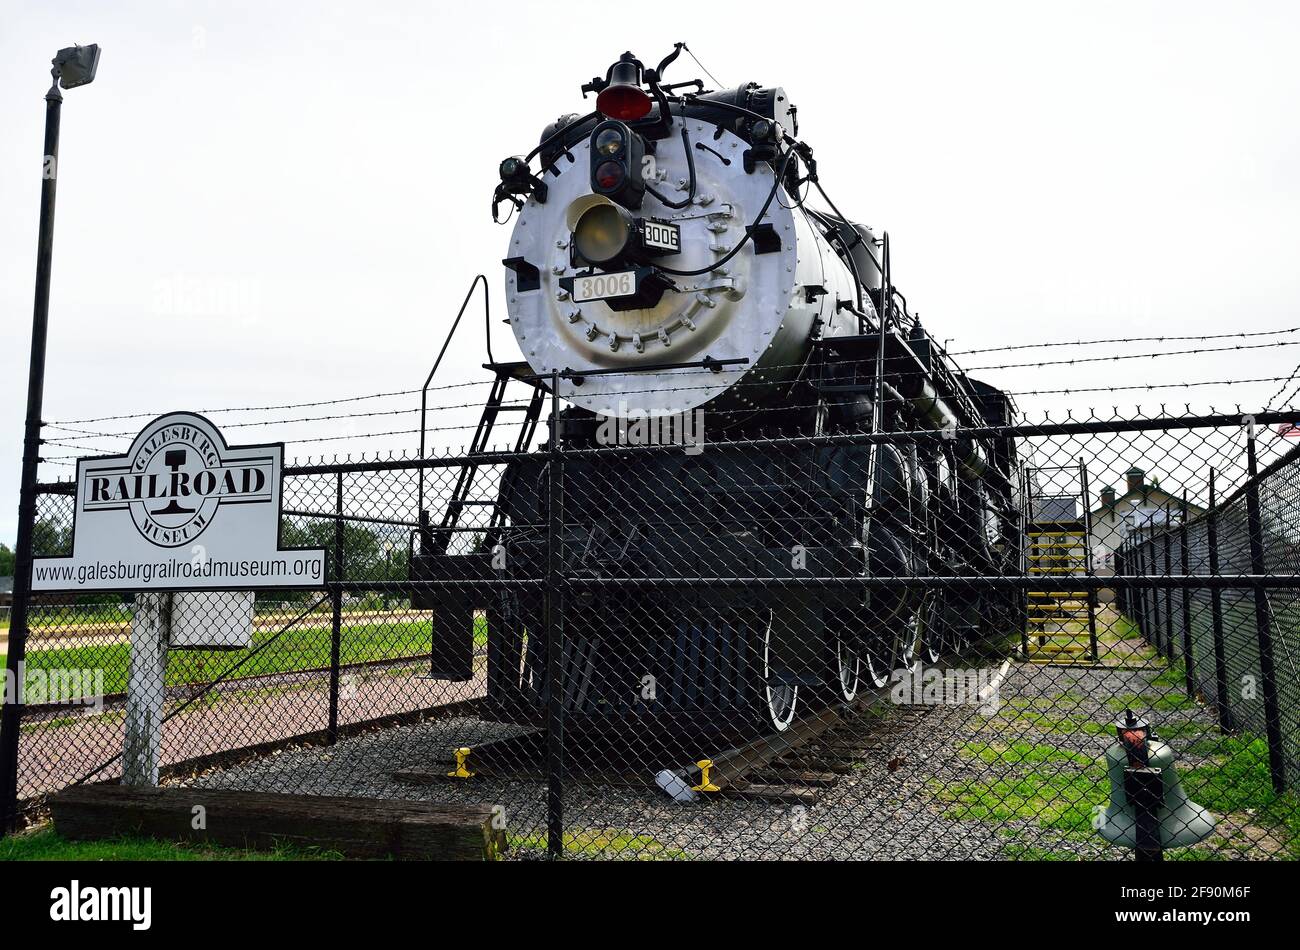 Galesburg, Illinois, USA. An old steam locomotive at the Galesburg Railroad Museum. Stock Photo